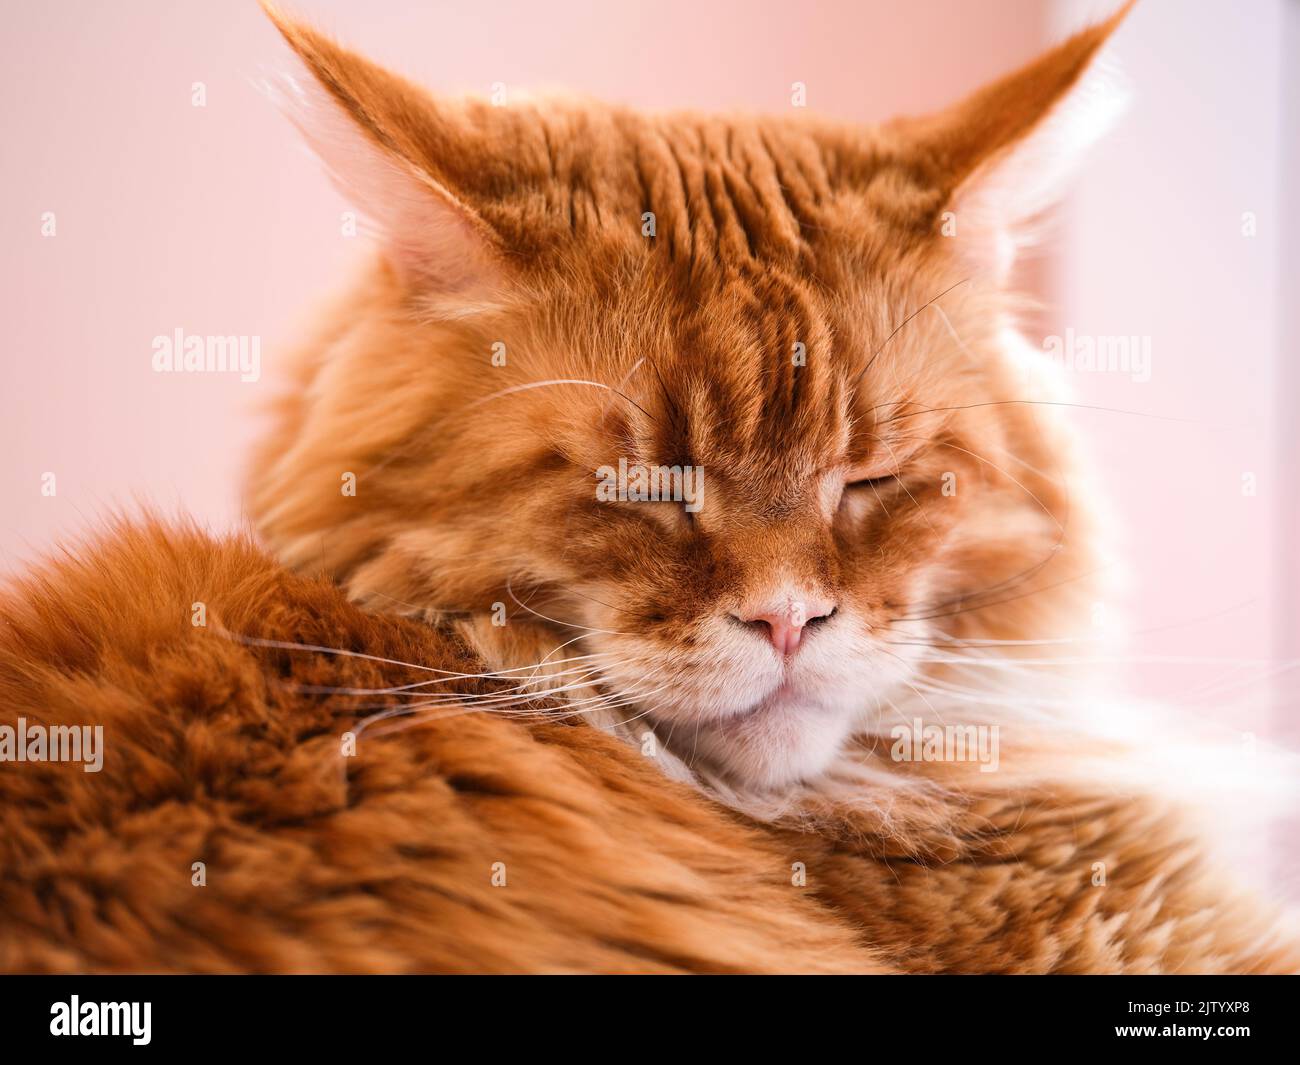 A portrait of a sleeping ginger Maine Coon cat. Stock Photo